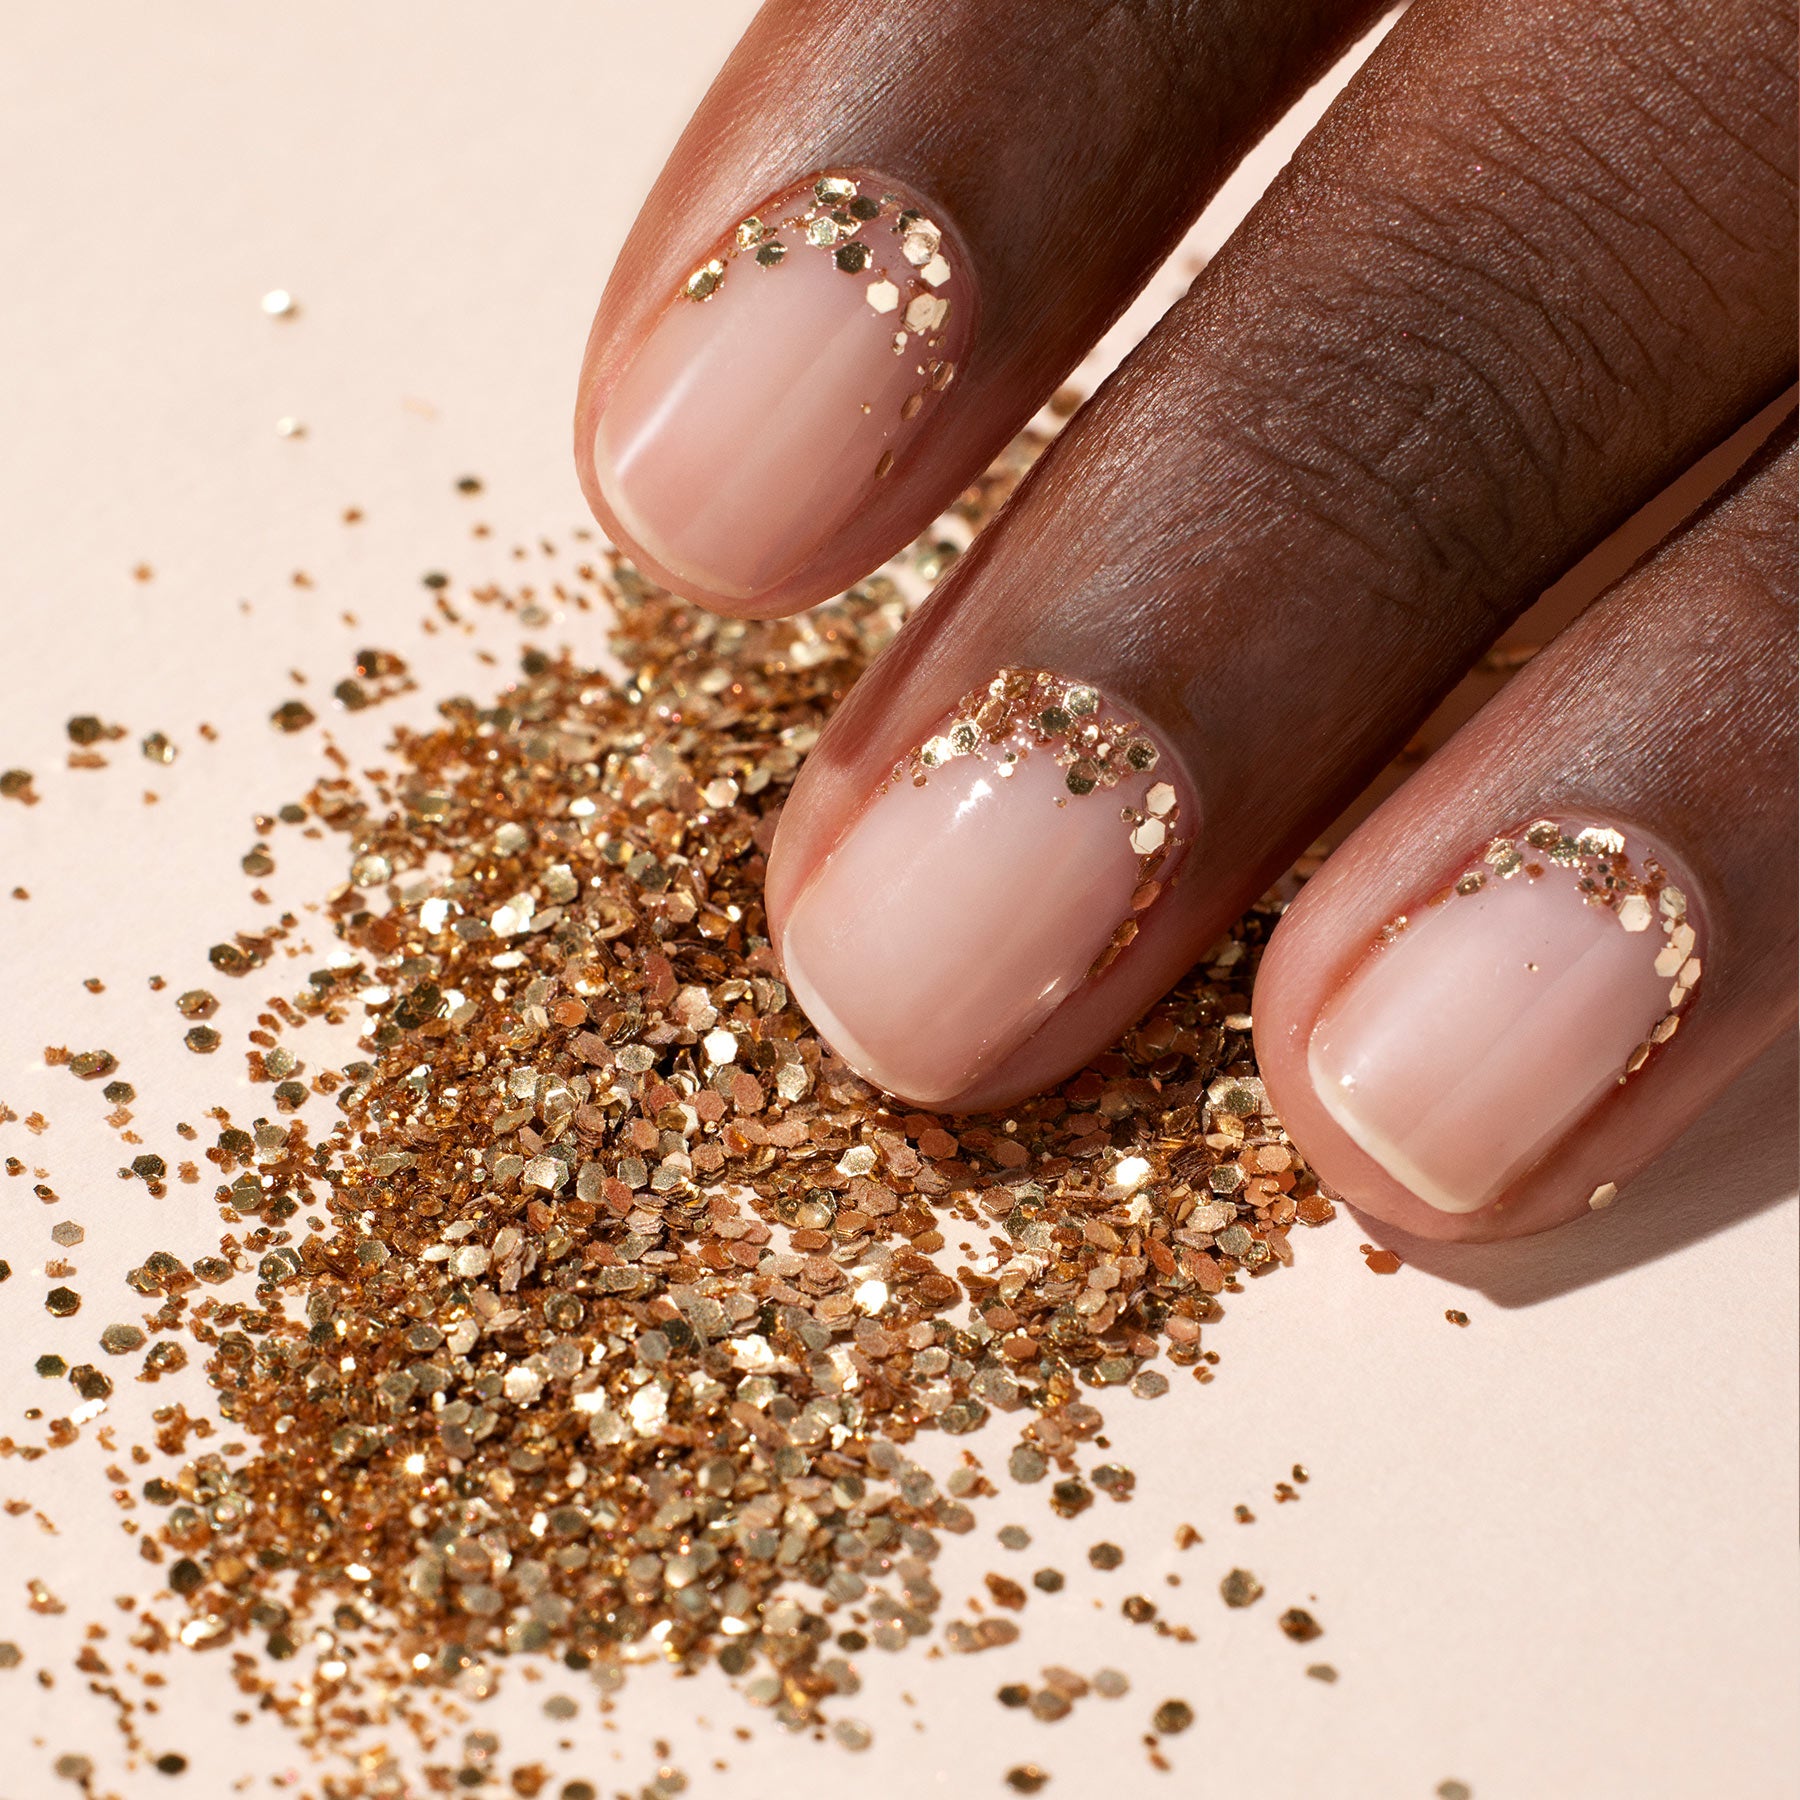 Indie Nails Bling Bling is Free of 12 toxins vegan cruelty-free quick dry  glossy finish chip Golden Glitter Colour shade Nail polish, enamel, lacquer,  paint Liquid: 5 ml